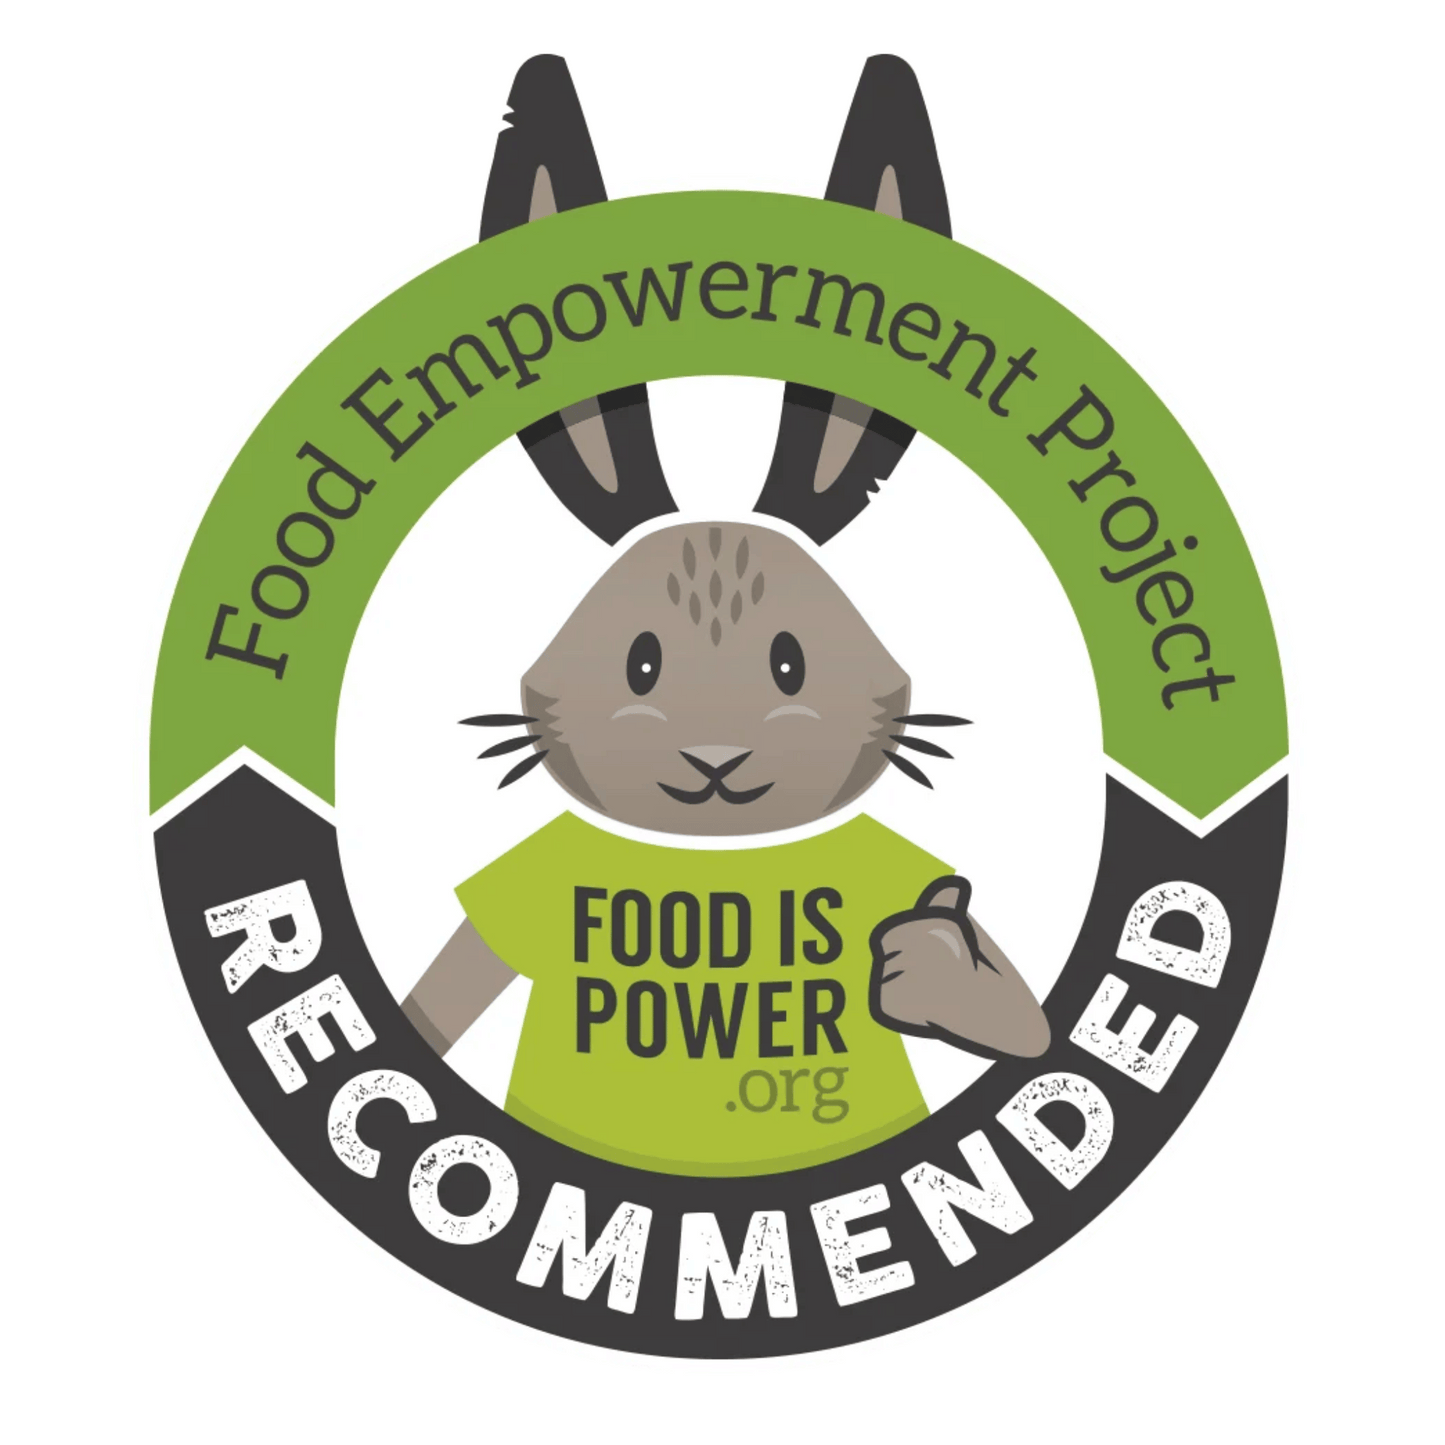 Our Cocoa Butter is Food Empowerment Project approved